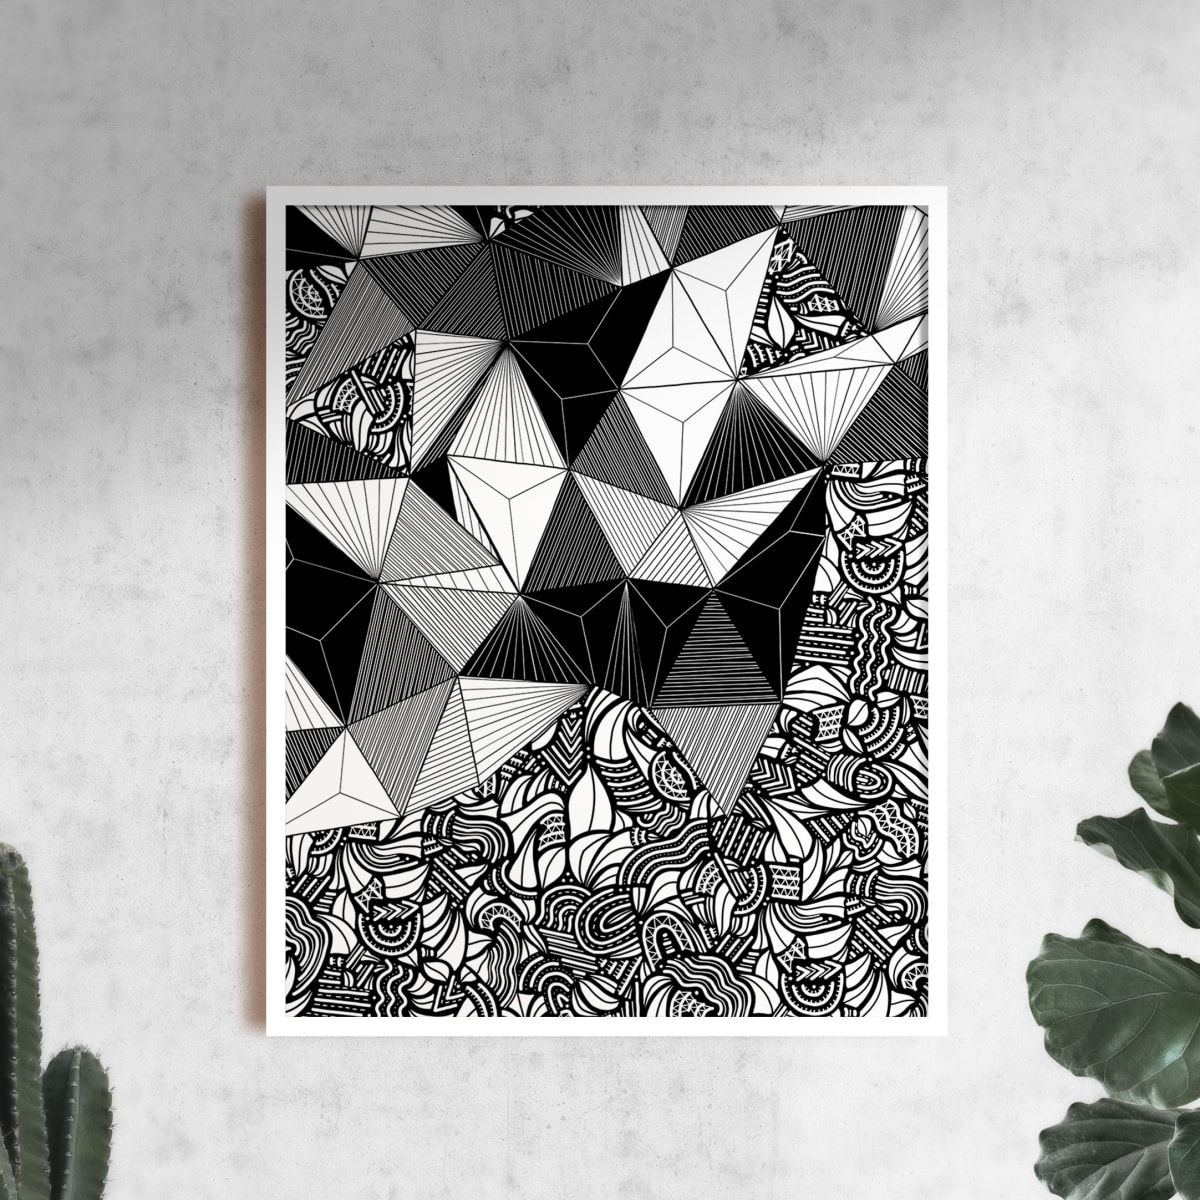 "Conscious Growth 065" Large One-of-a-Kind Print by Debbie Clapper  Image: Conscious Growth Print 065, a black and white one of a kind archival modern art print